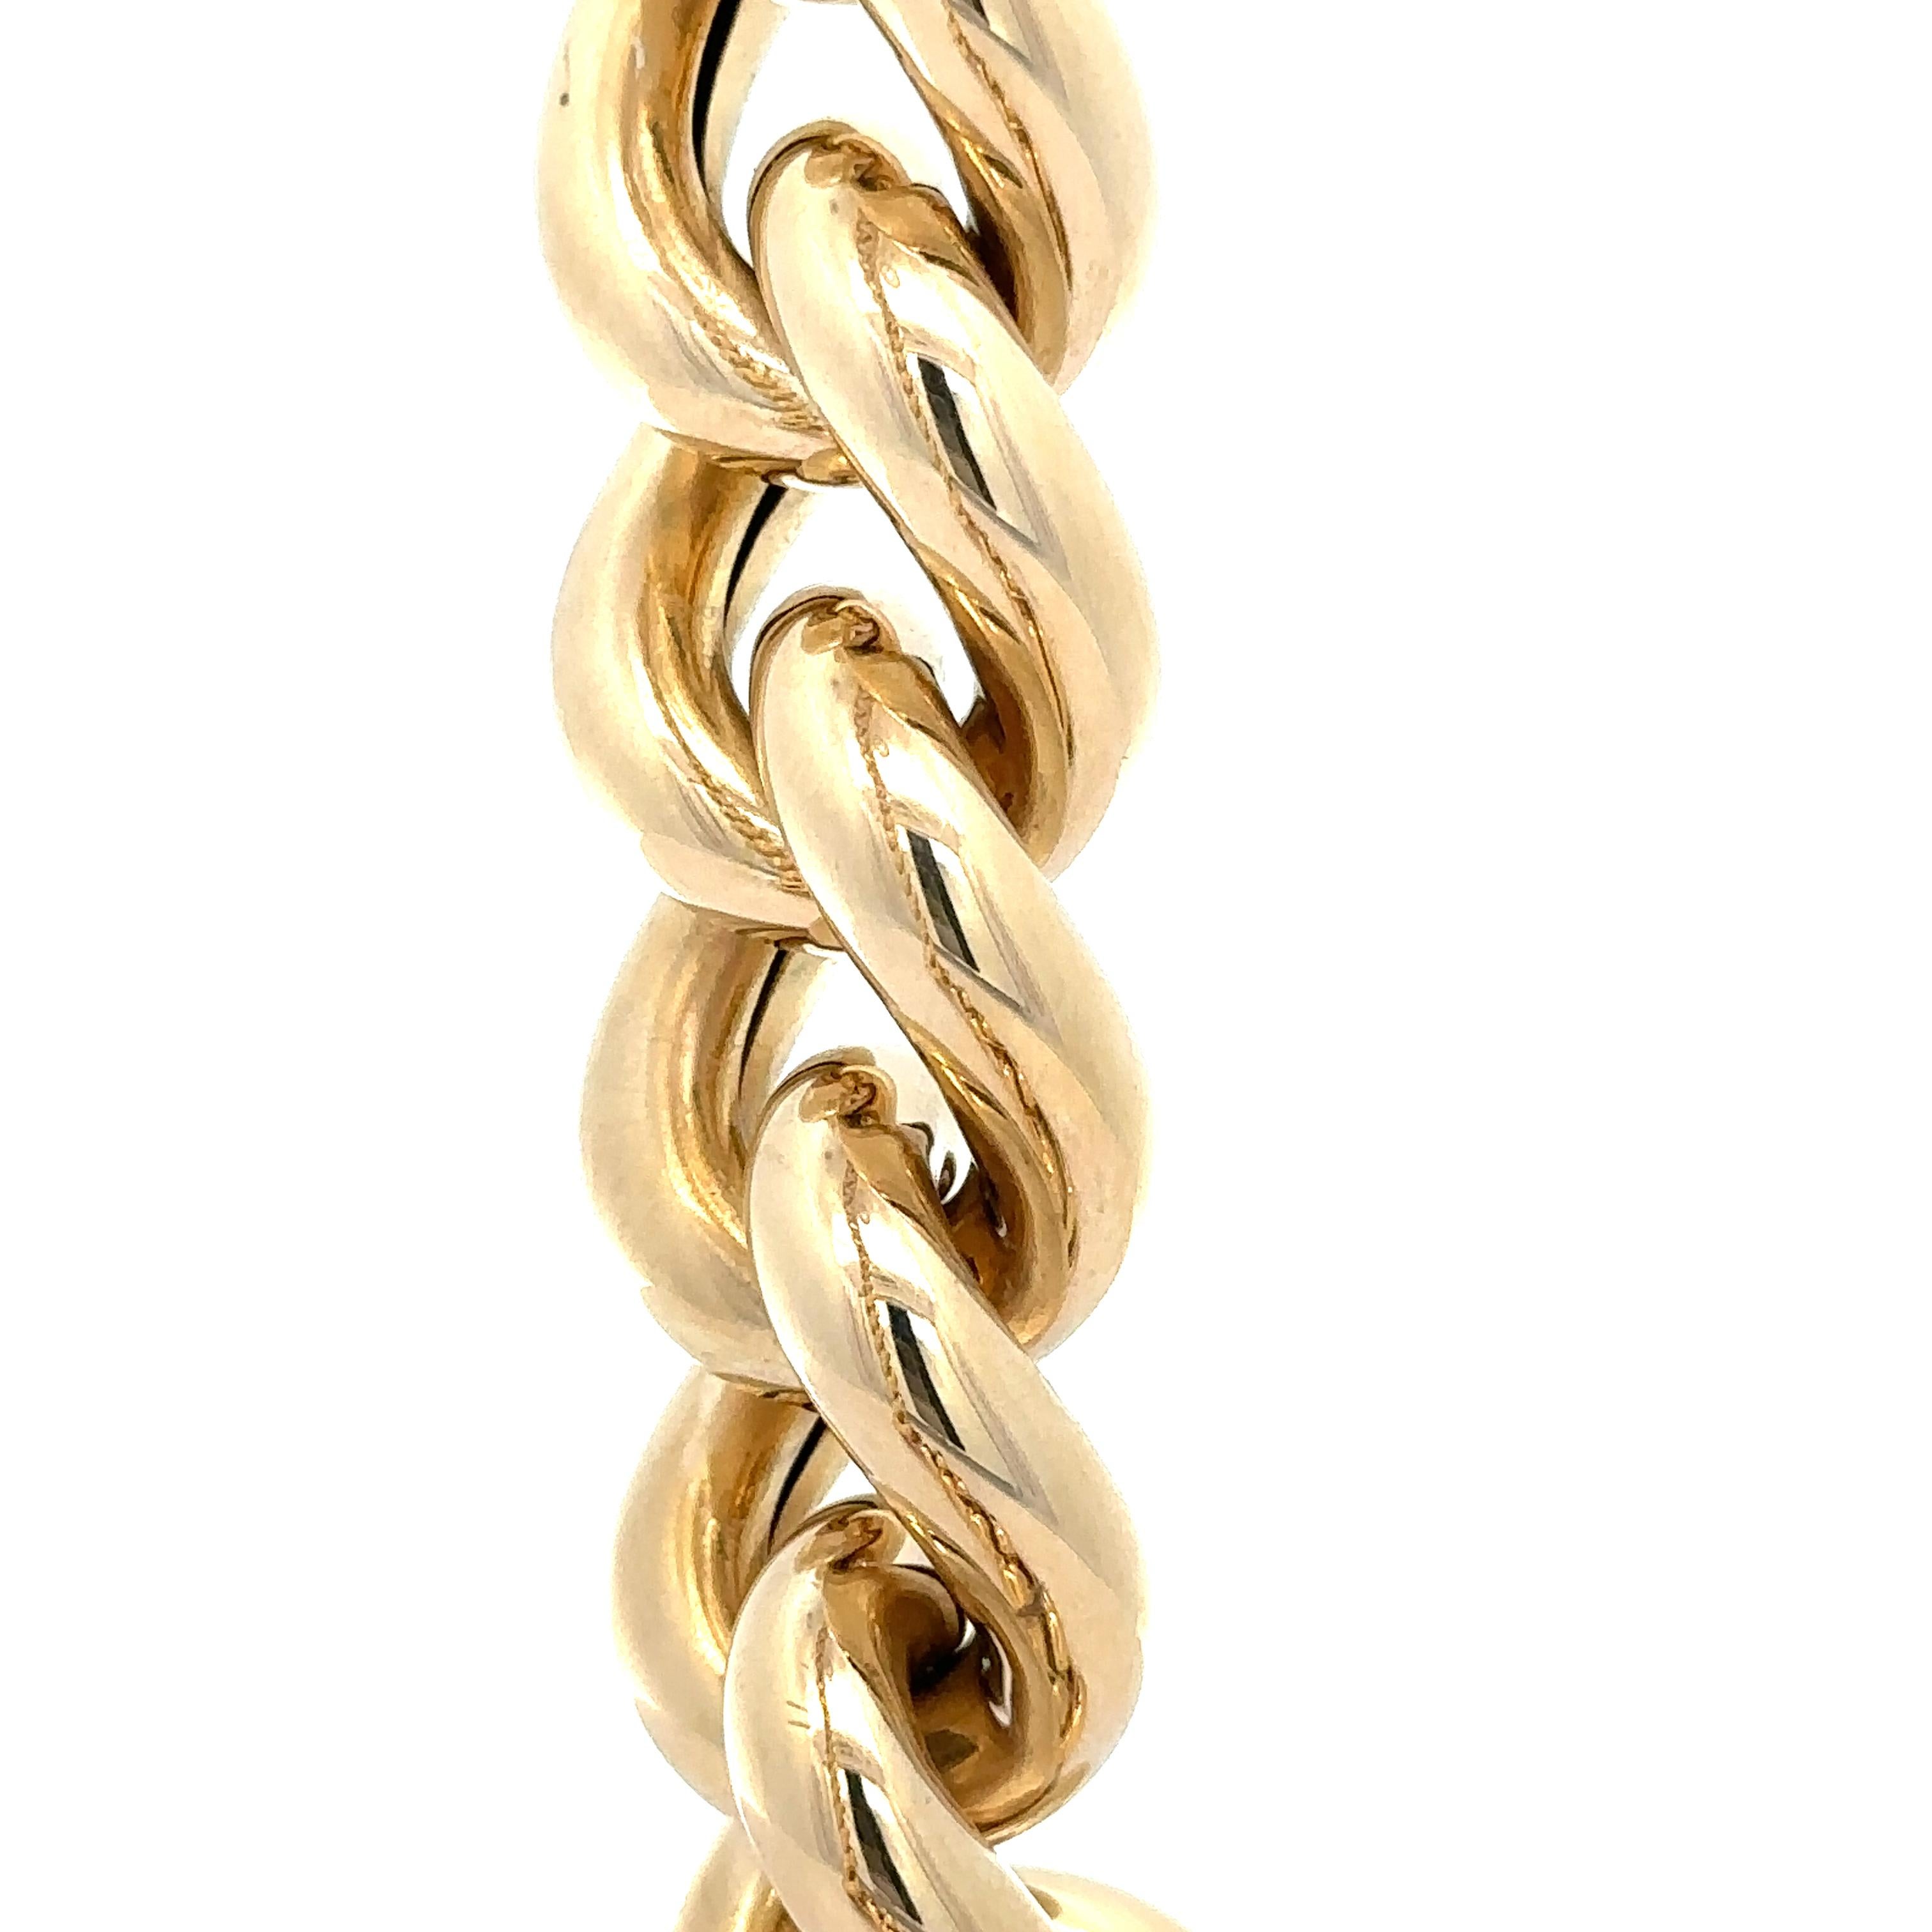 20mm gold chain